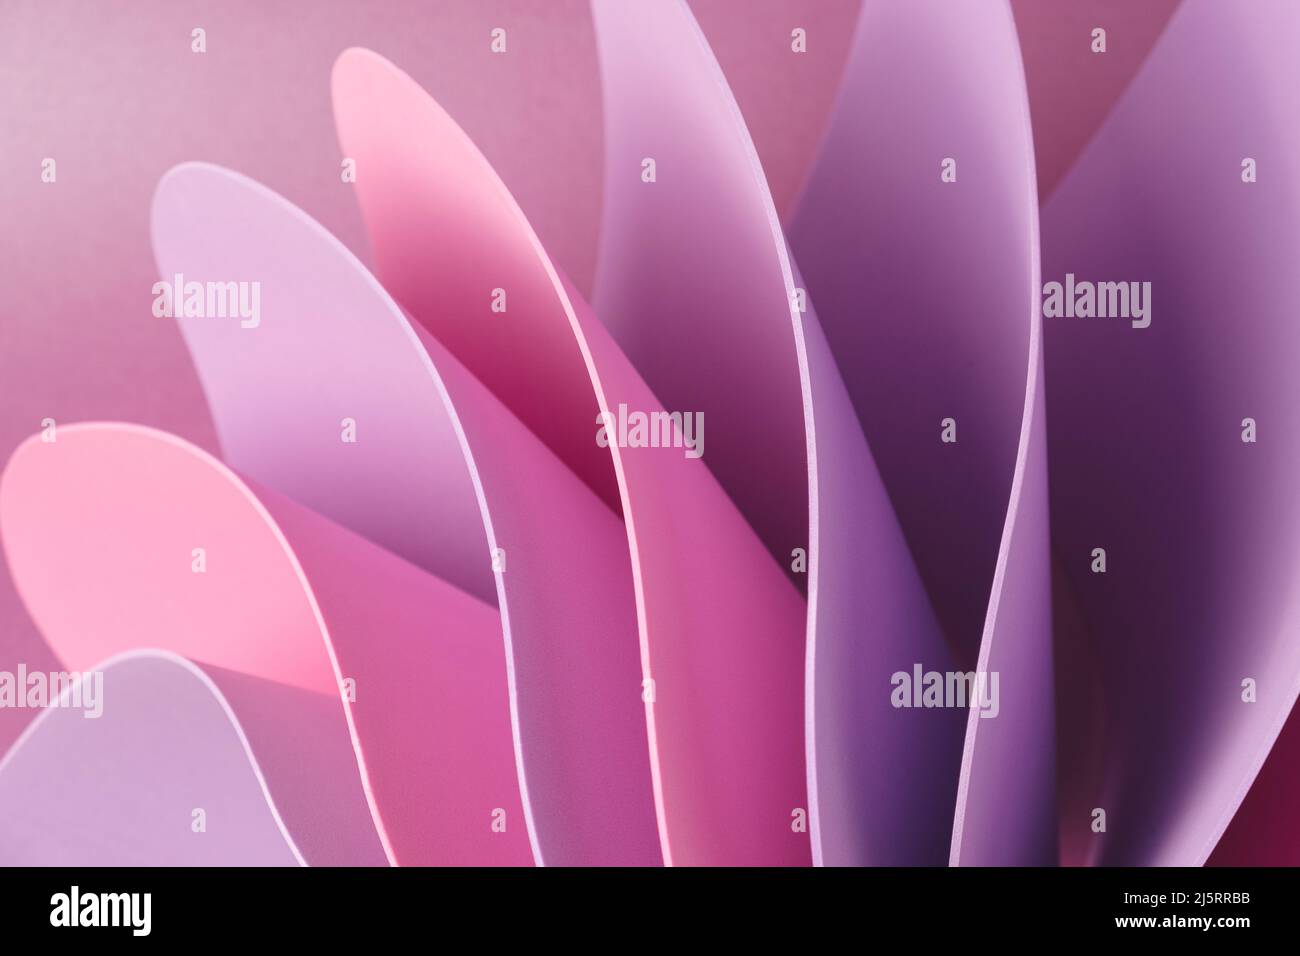 Pink and violet abstract shapes on a purple background. Elegant soft backdrop. Stock Photo